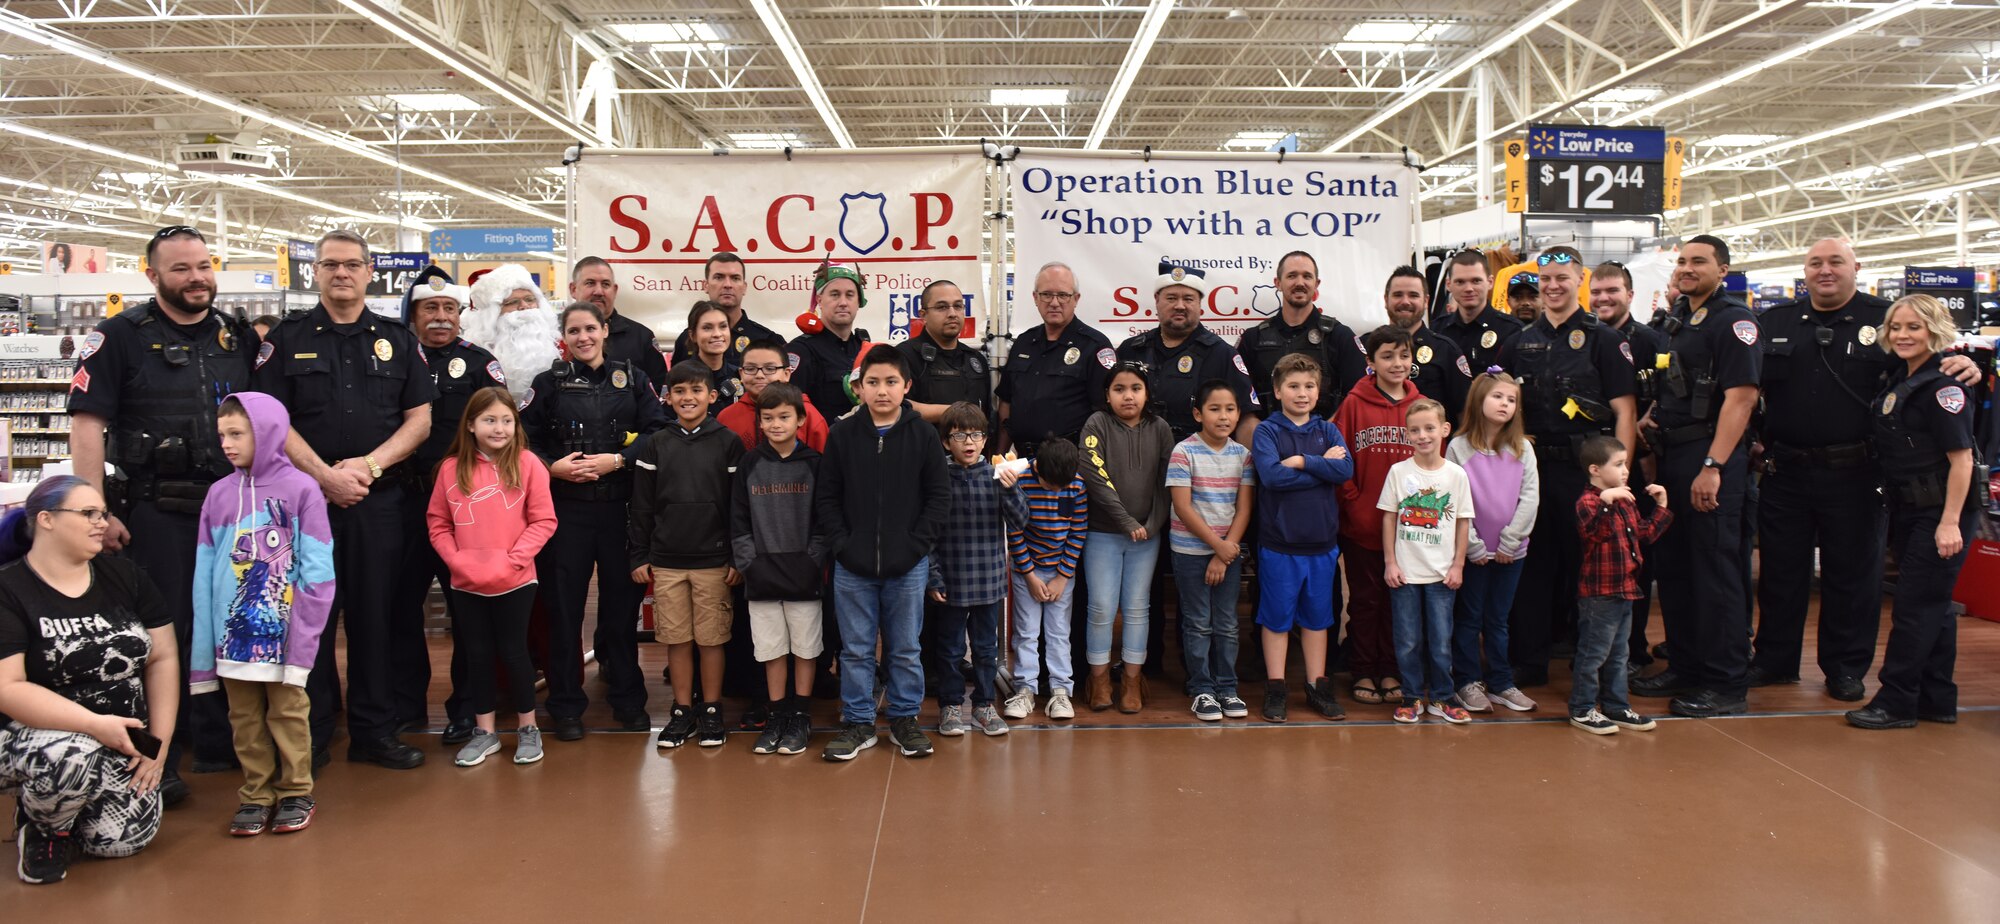 Participants and volunteers at the Operation Blue Santa Shop with a Cop event in San Angelo, Texas, stand for a group photo before beginning shopping Dec. 14, 2019. After shopping volunteers also wrapped any presents for the participants. (U.S. Air Force photo by Senior Airman Seraiah Wolf)